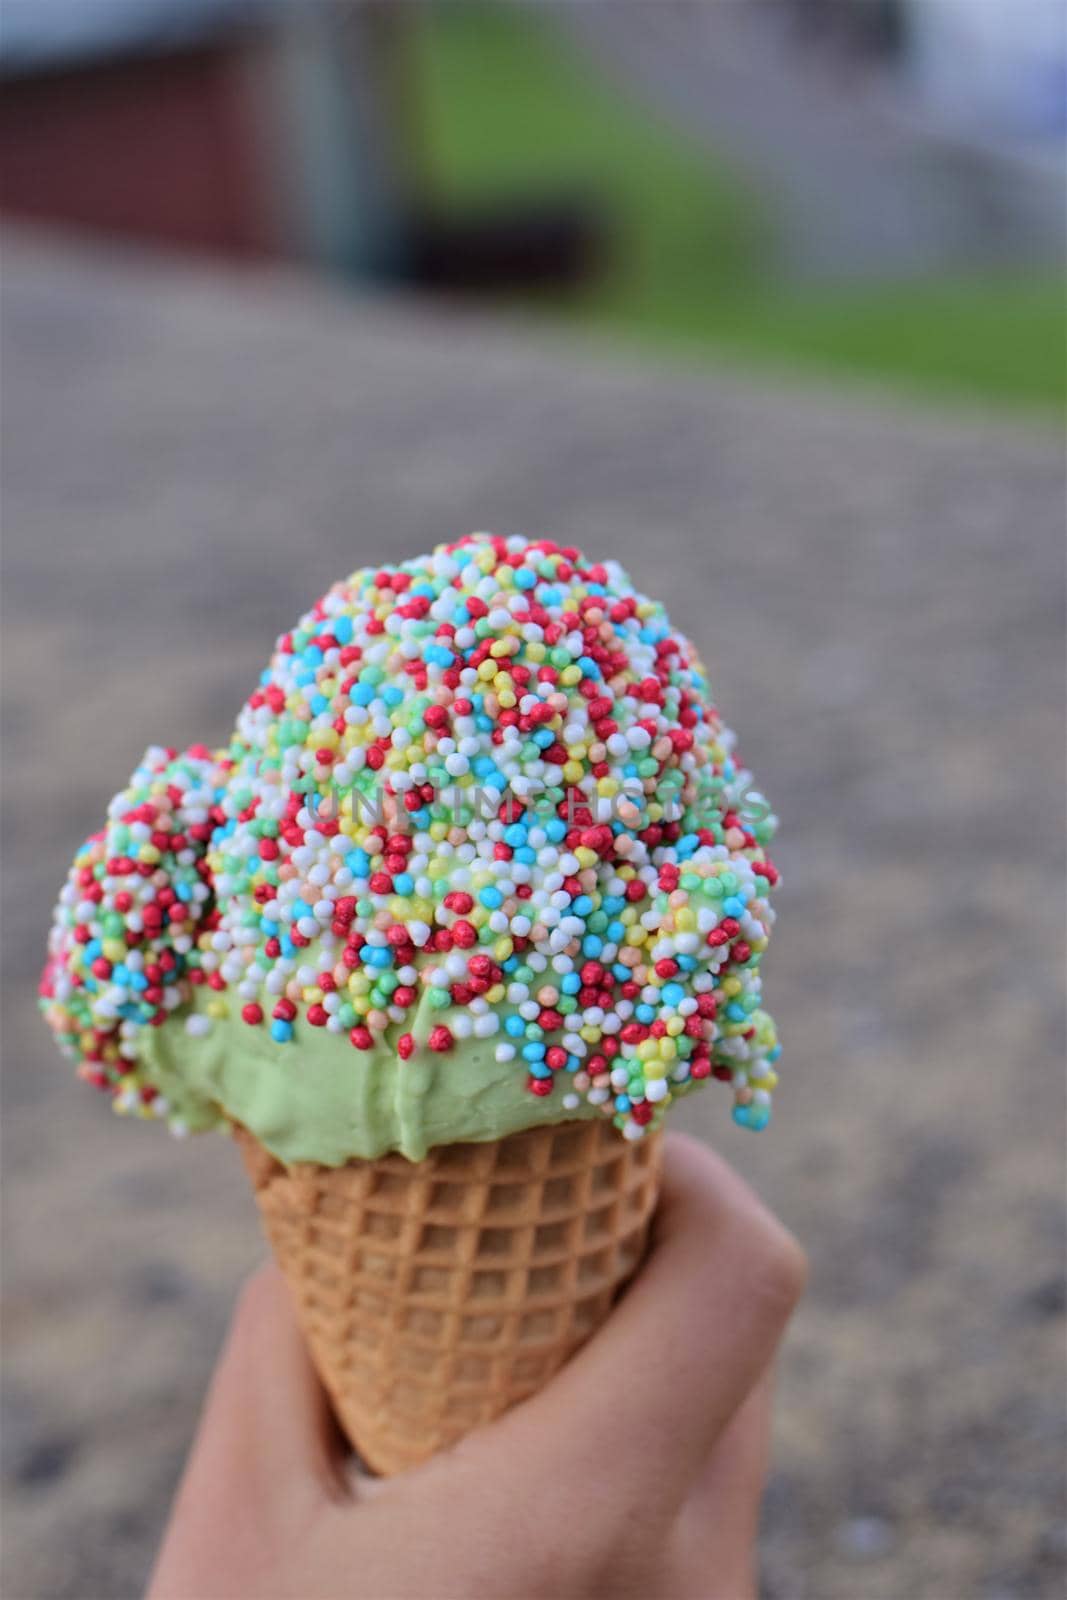 Ice cream with colorful sugar sprinkles in hand as a close-up against a blurred background